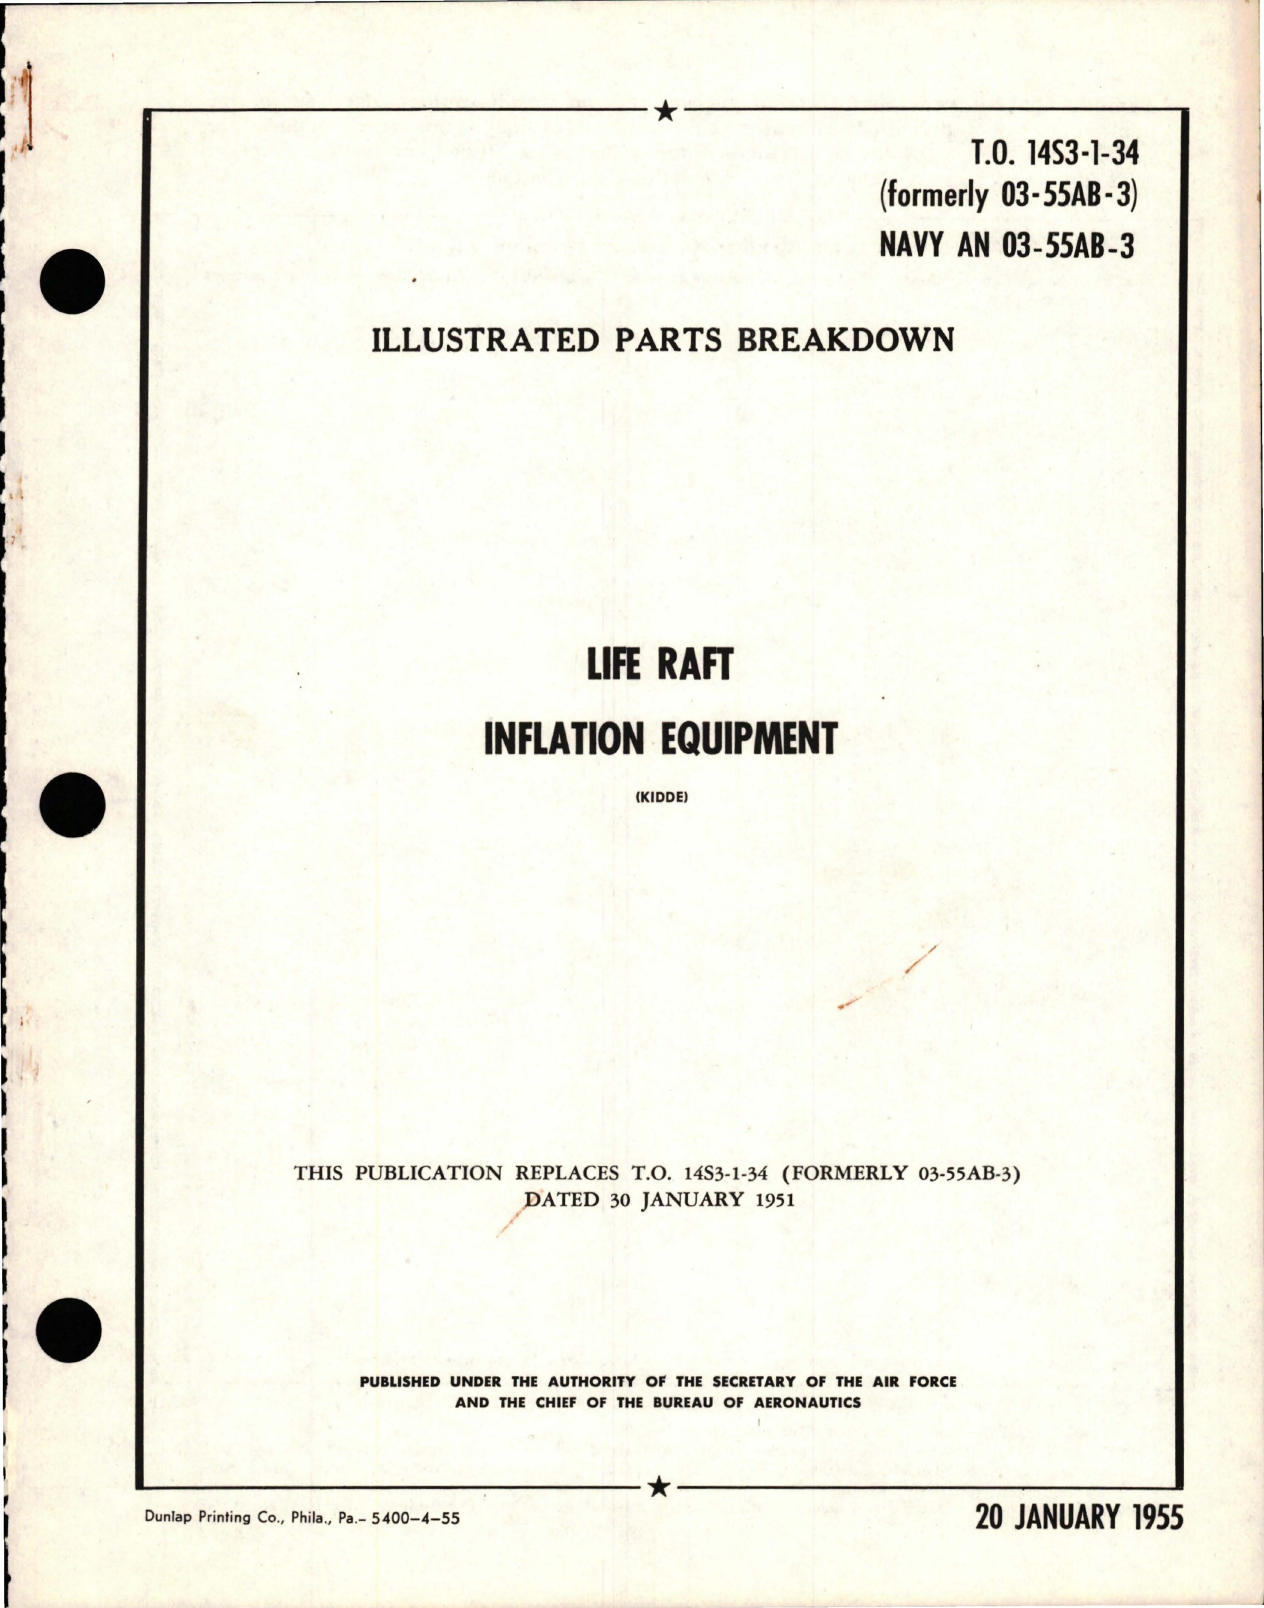 Sample page 1 from AirCorps Library document: Illustrated Parts Breakdown for Life Raft Inflation Equipment